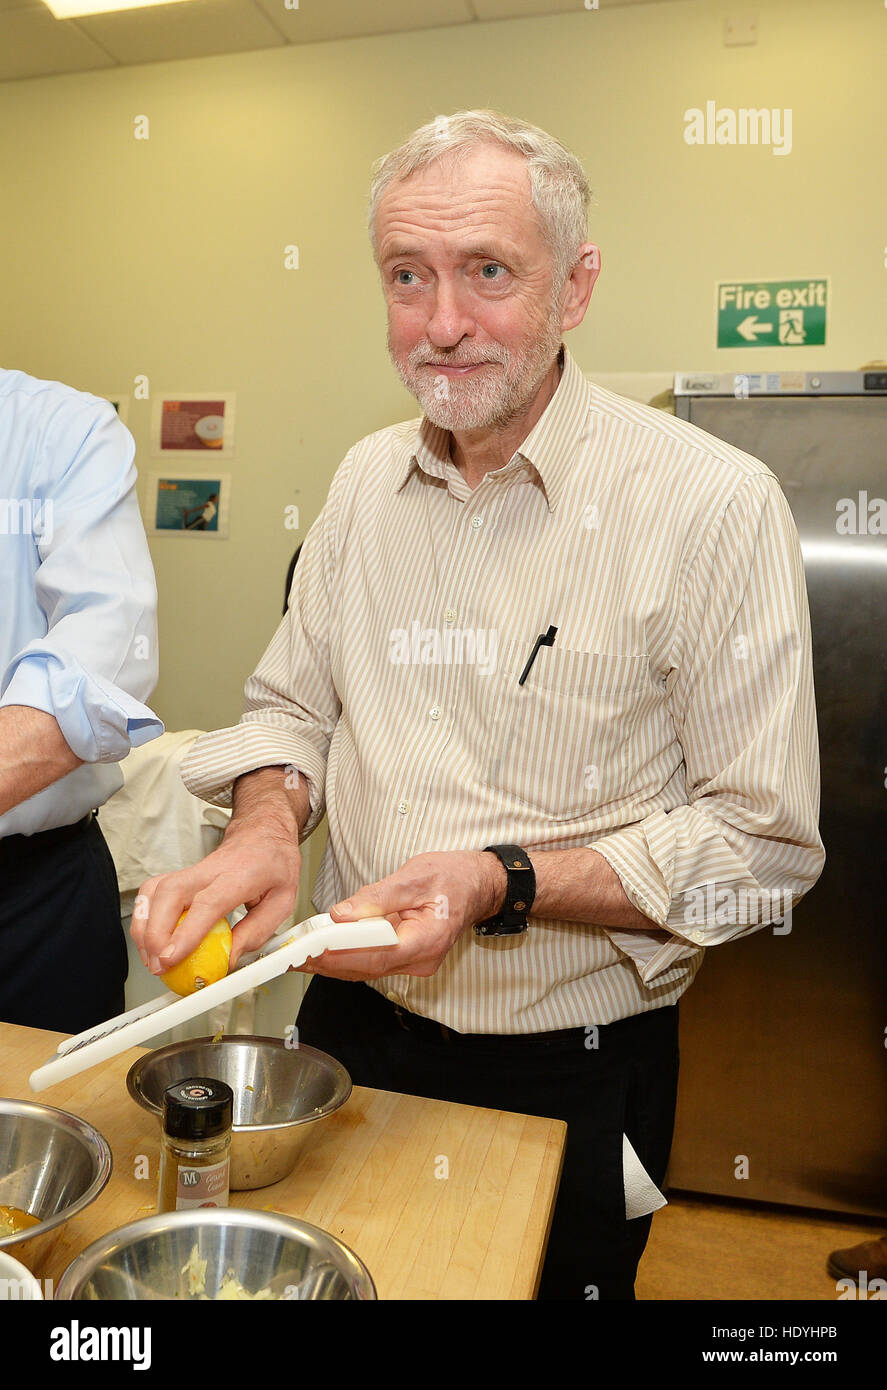 Labour leader Jeremy Corbyn, takes part in a class showing how to make cheap healthy food easy to cook, during a visit to the Centrepoint hostel, in Camberwell, London. PRESS ASSOCIATION Photo Picture date: Thursday December 15 2016. Photo credit should read: John Stillwell/PA Wire Stock Photo